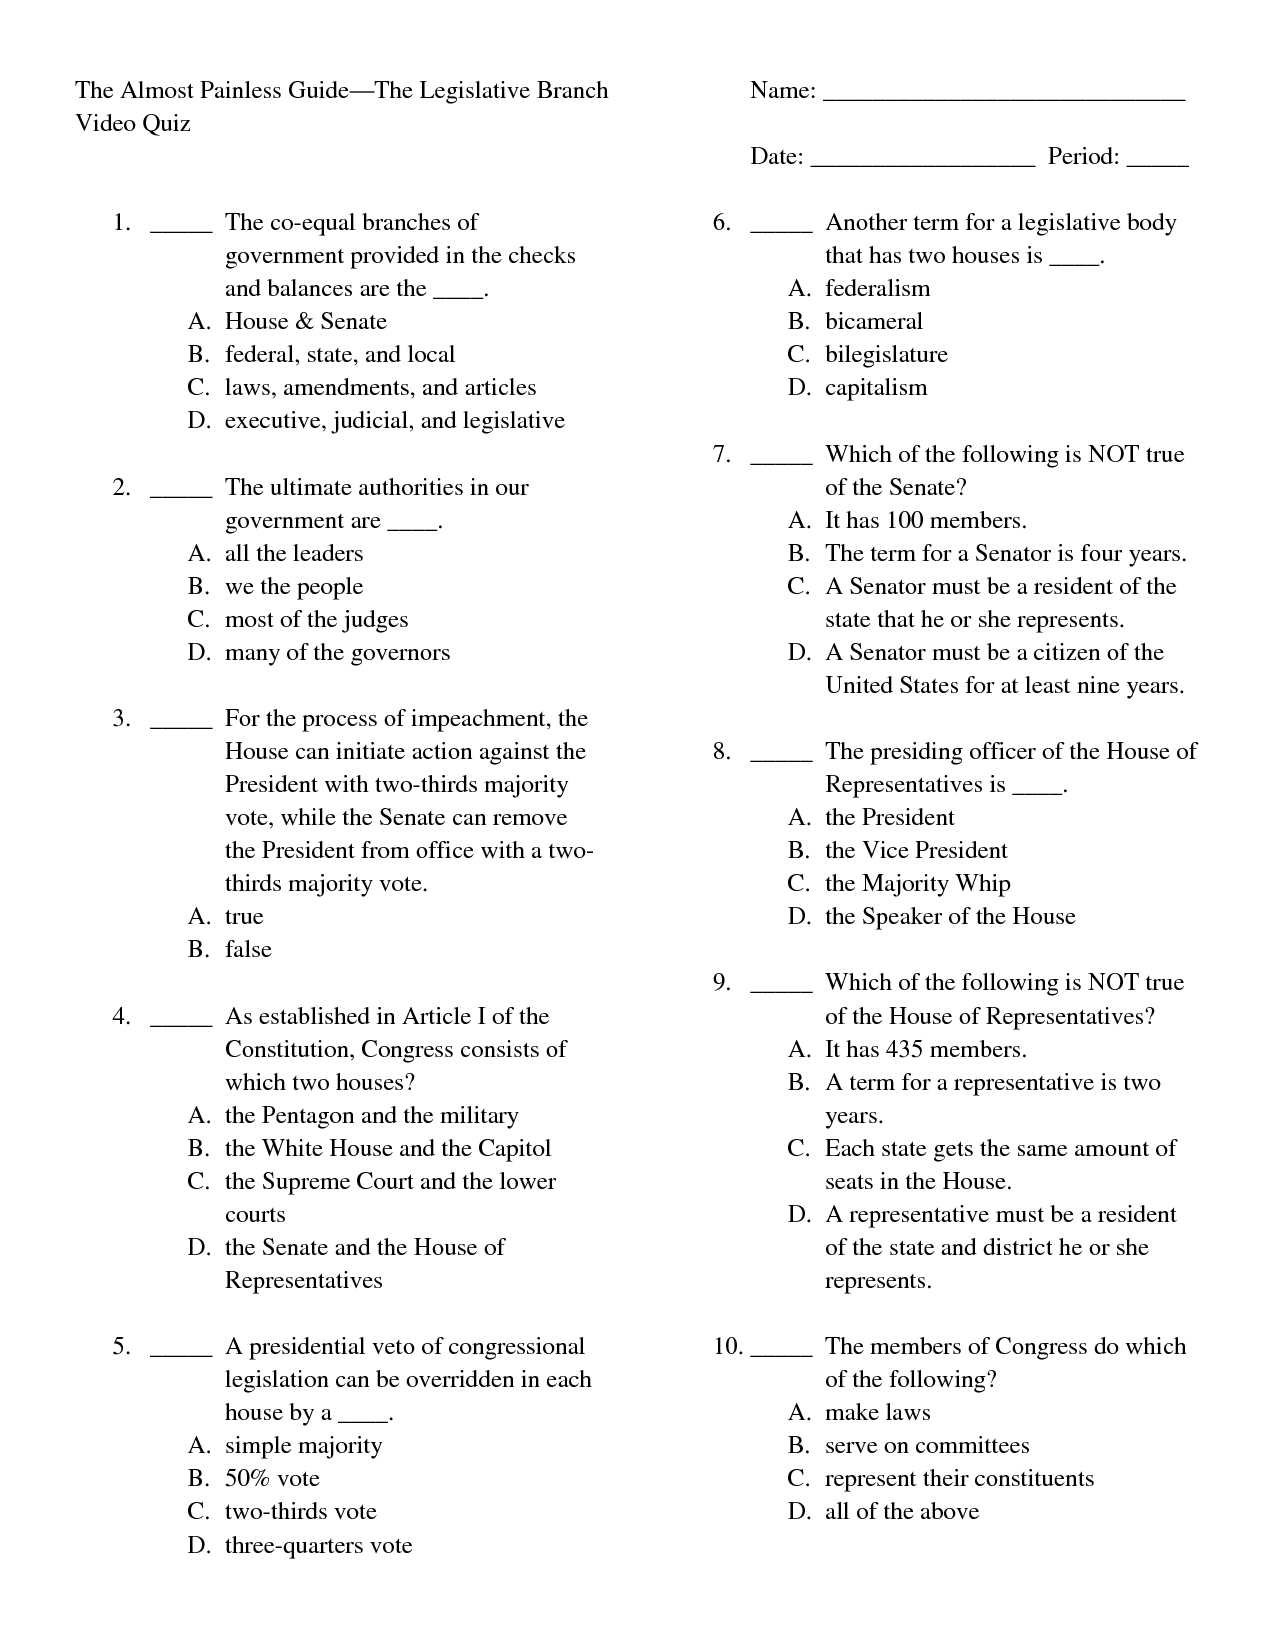 types-of-government-worksheet-answers